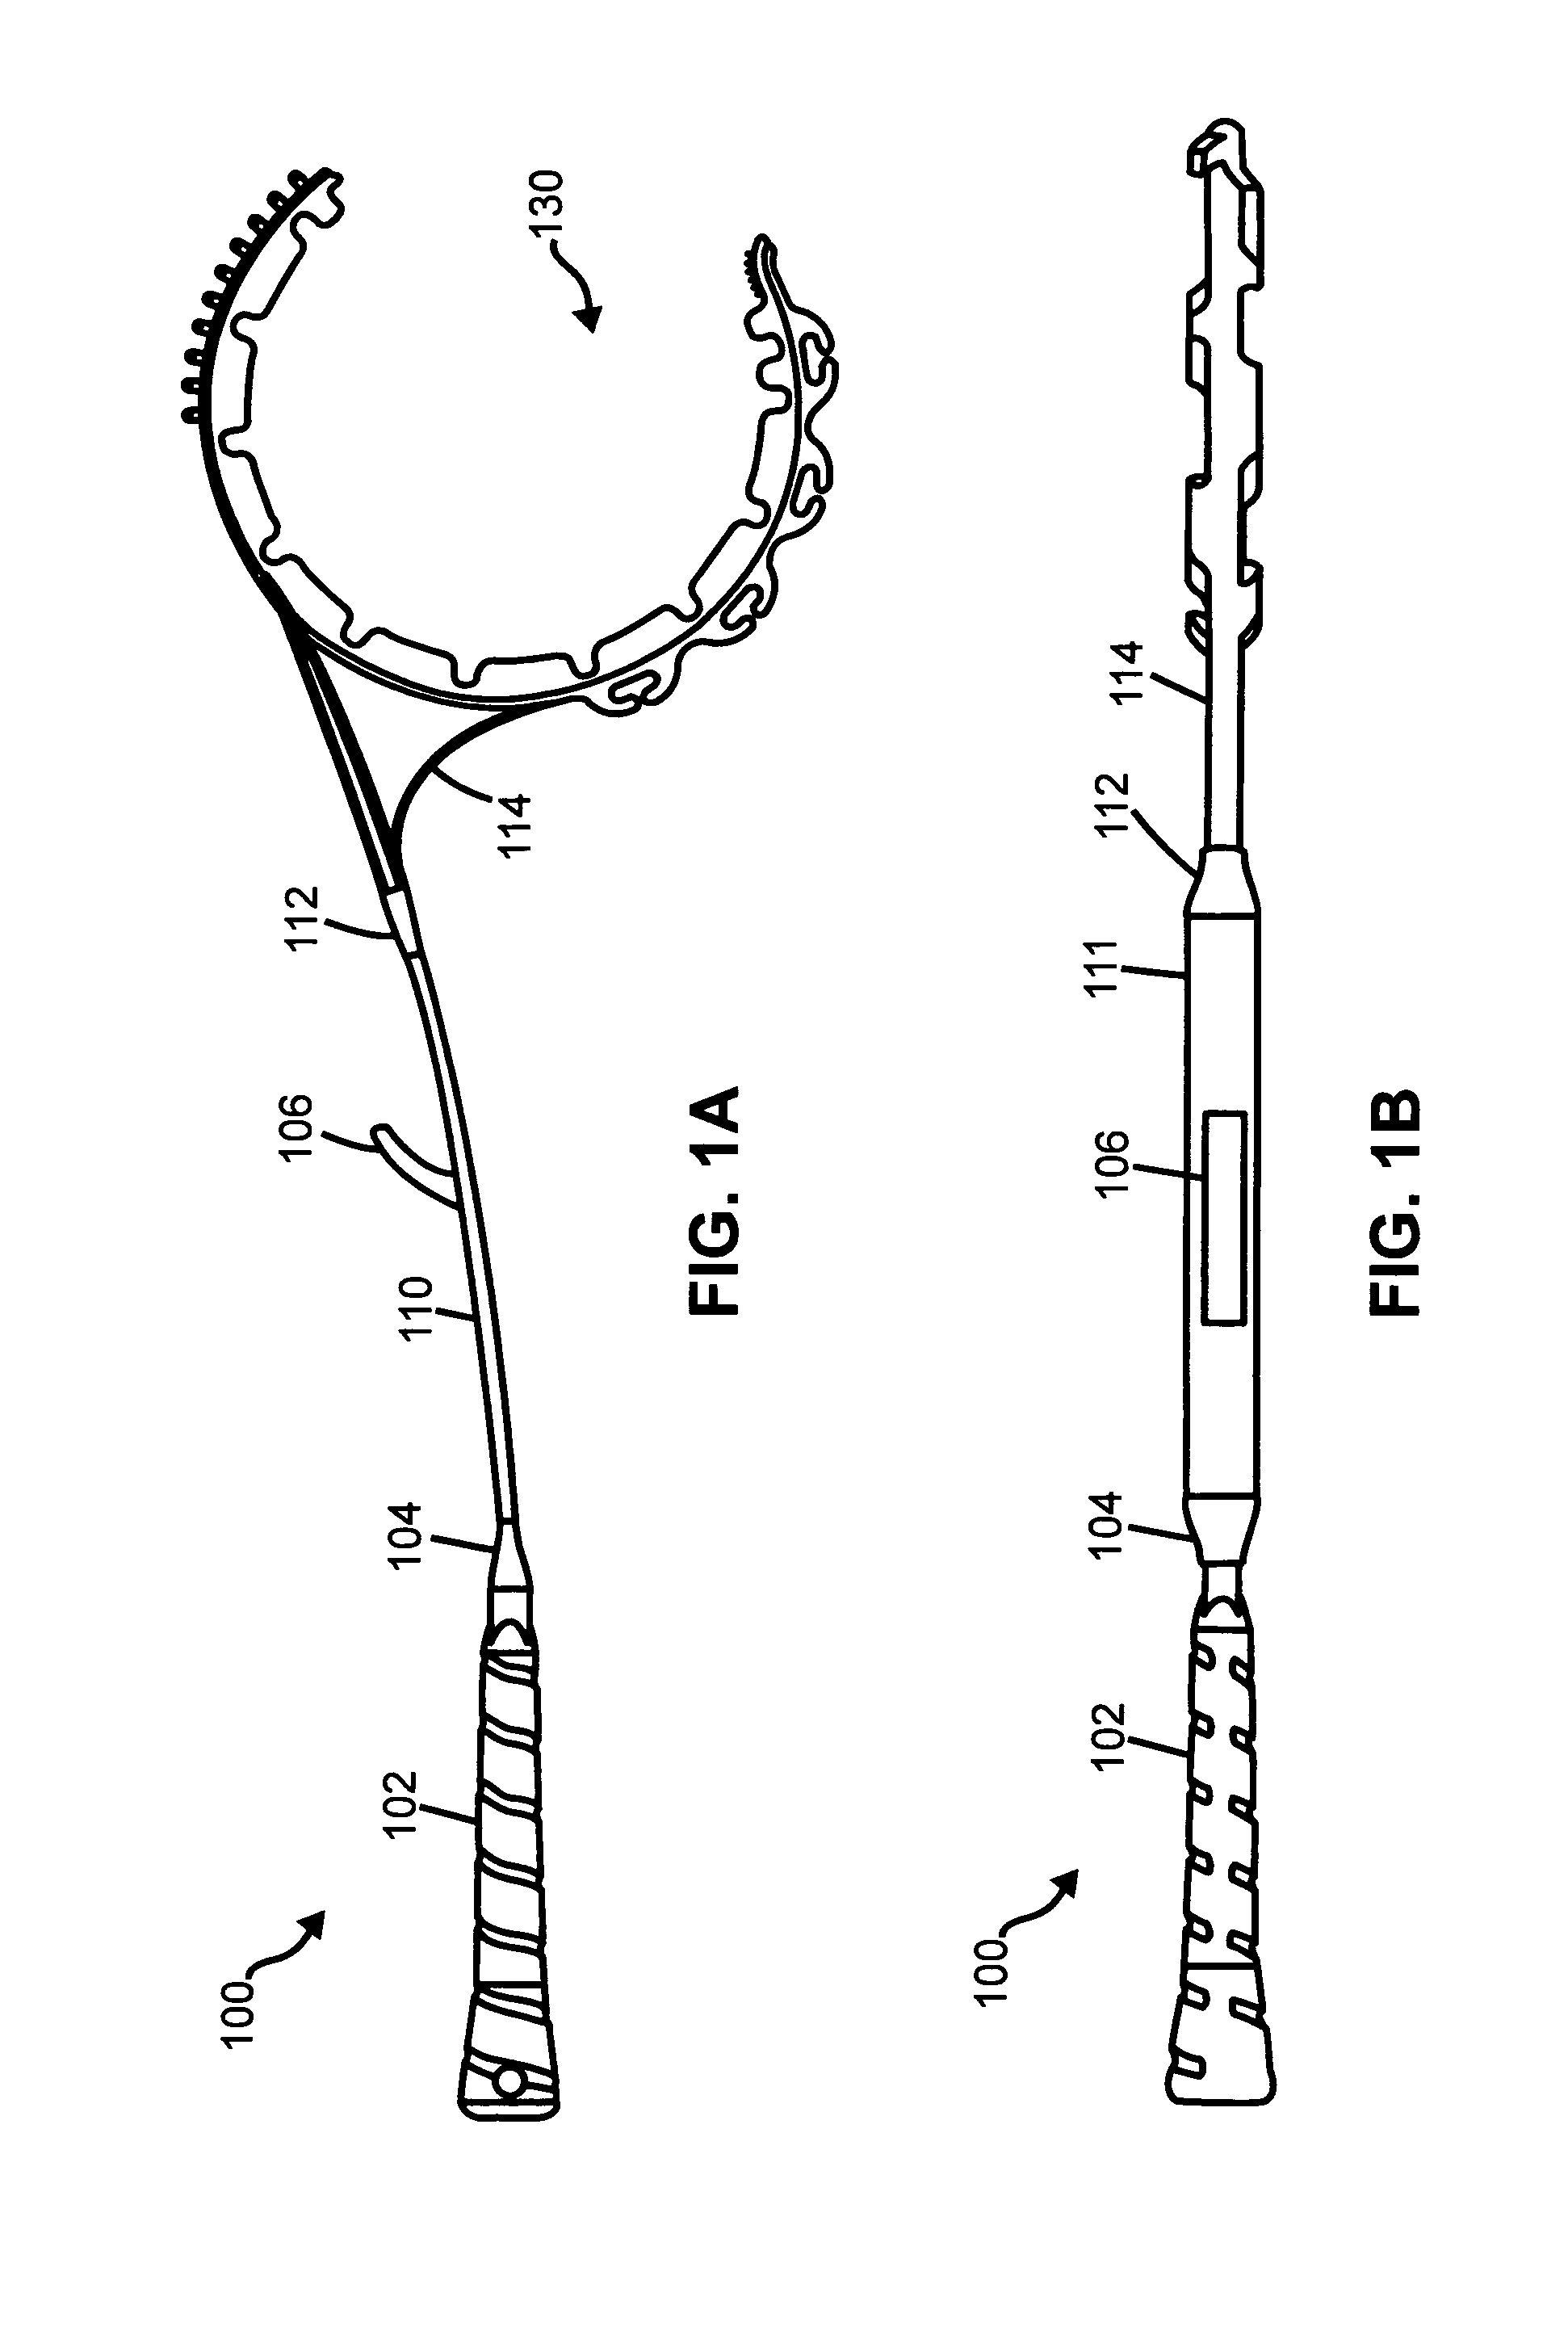 Disk launching apparatus and method